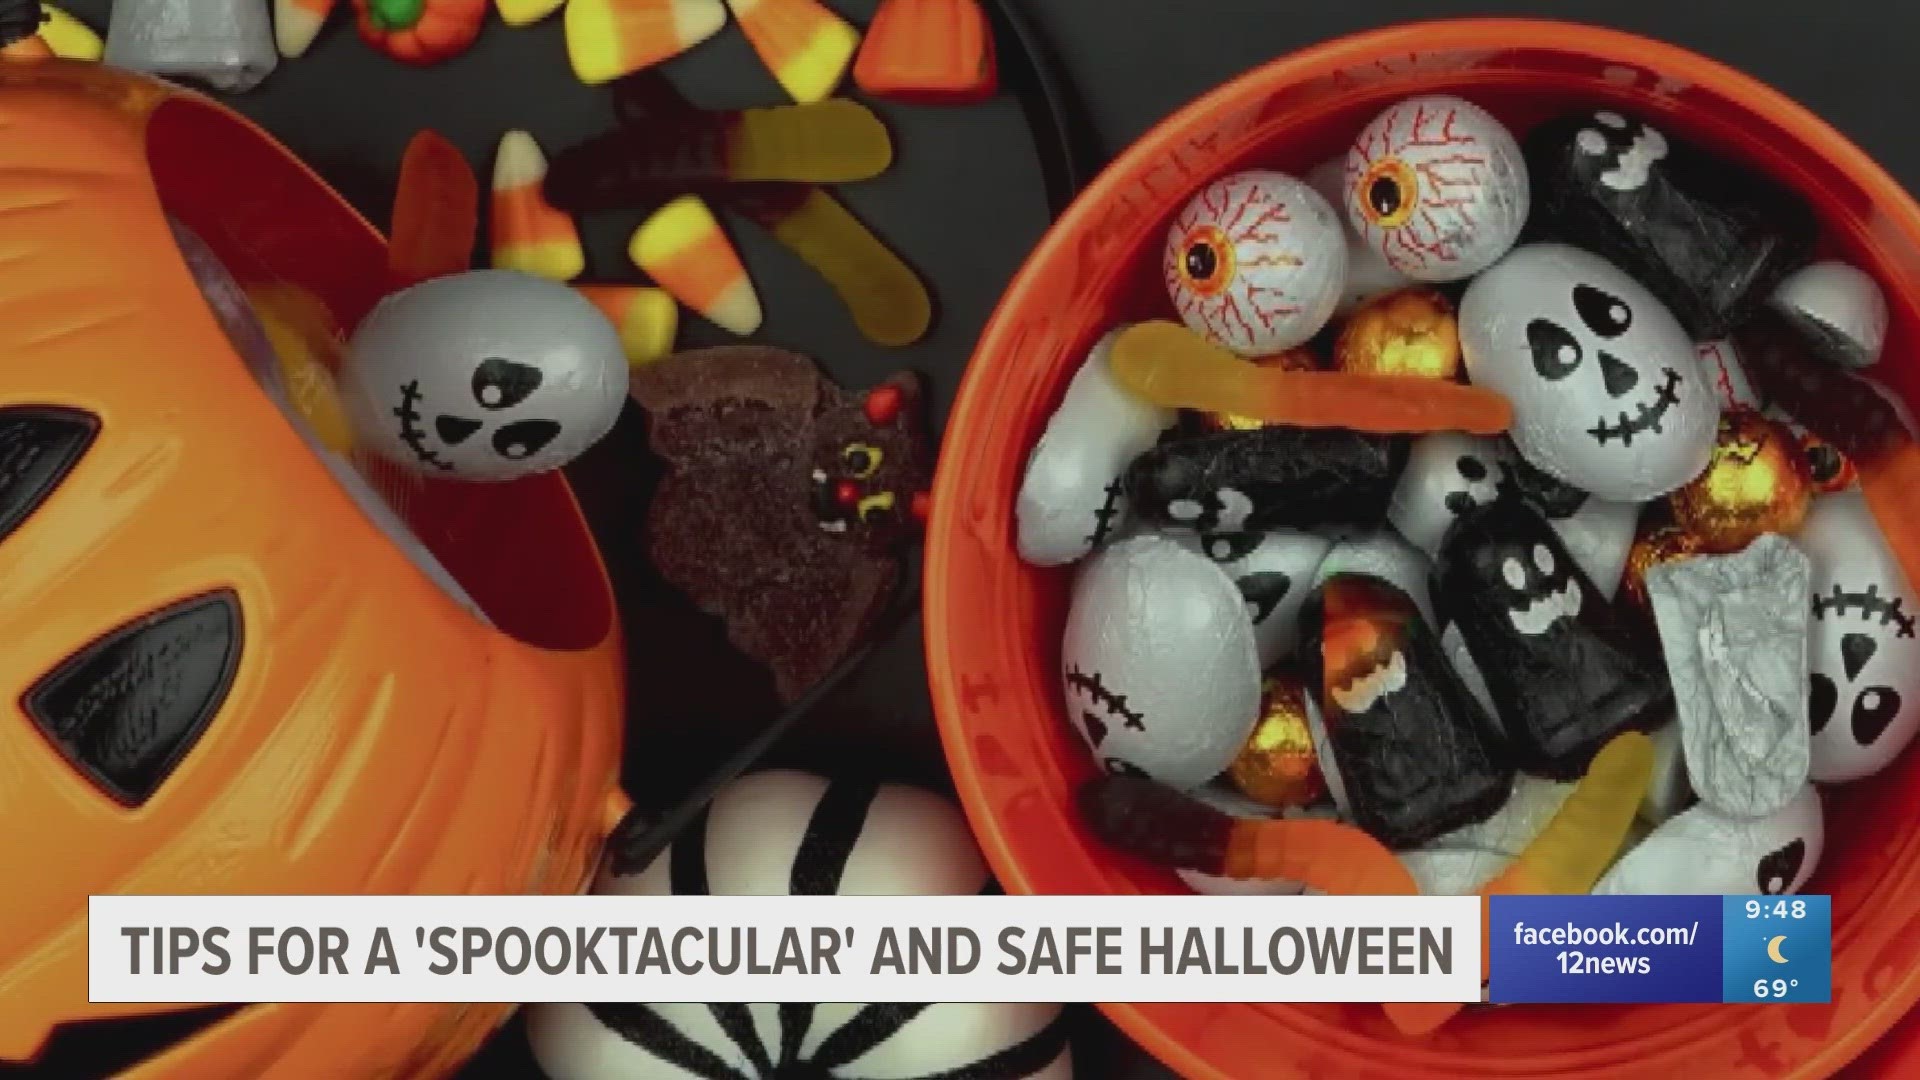 By keeping these safety tips in mind, you can be sure that you and your candy hunters will have a night of all the treats without any of the tricks.